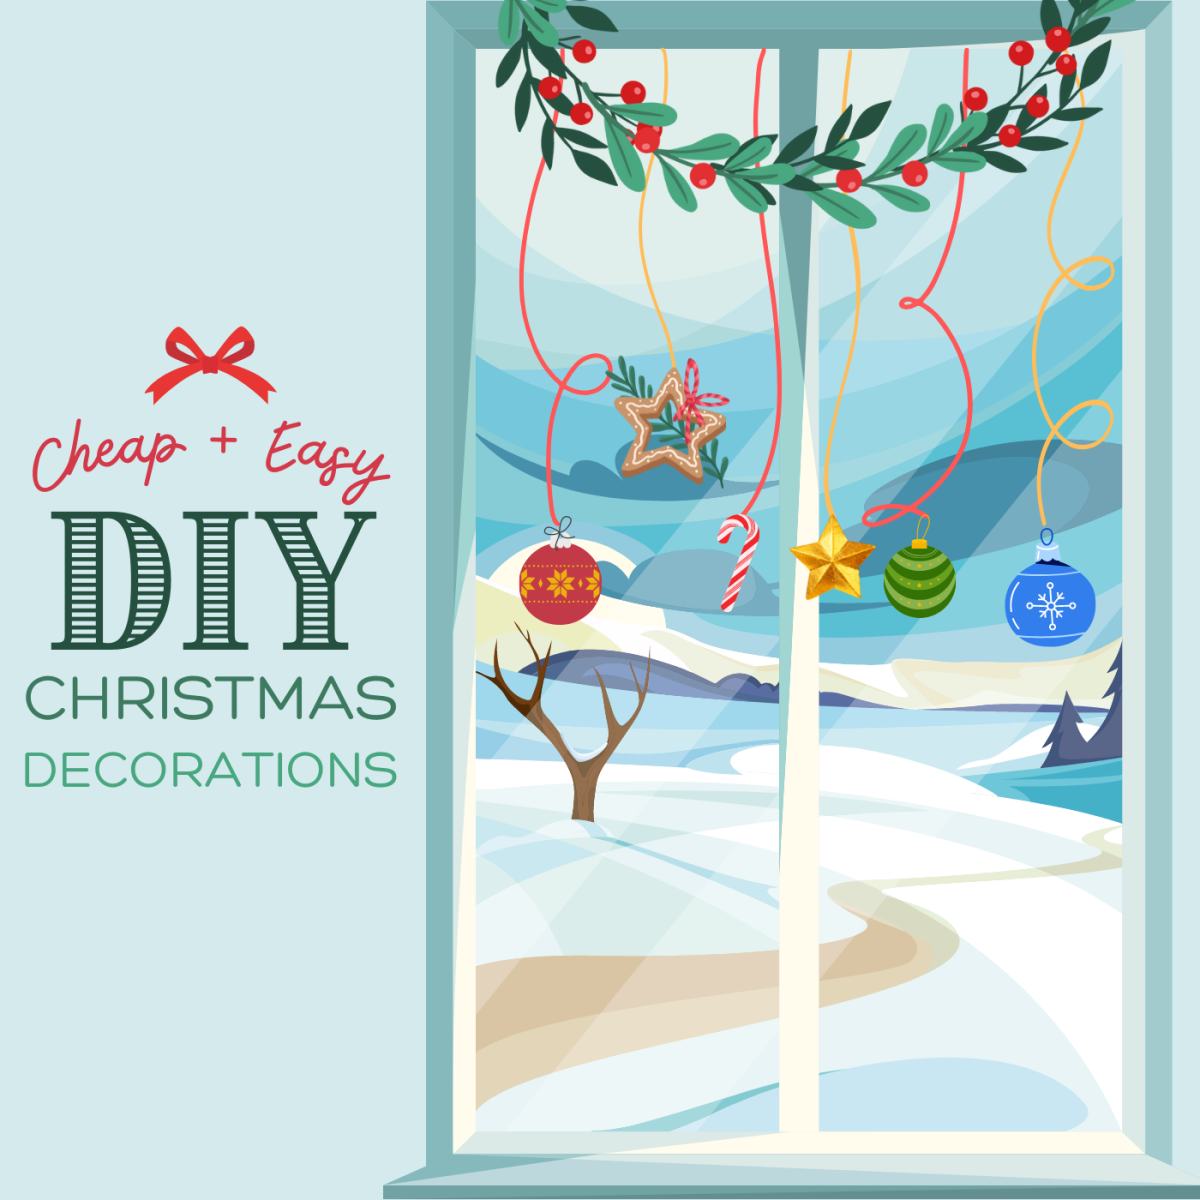 Budget-Friendly Christmas Decorations You Can Make Quickly!